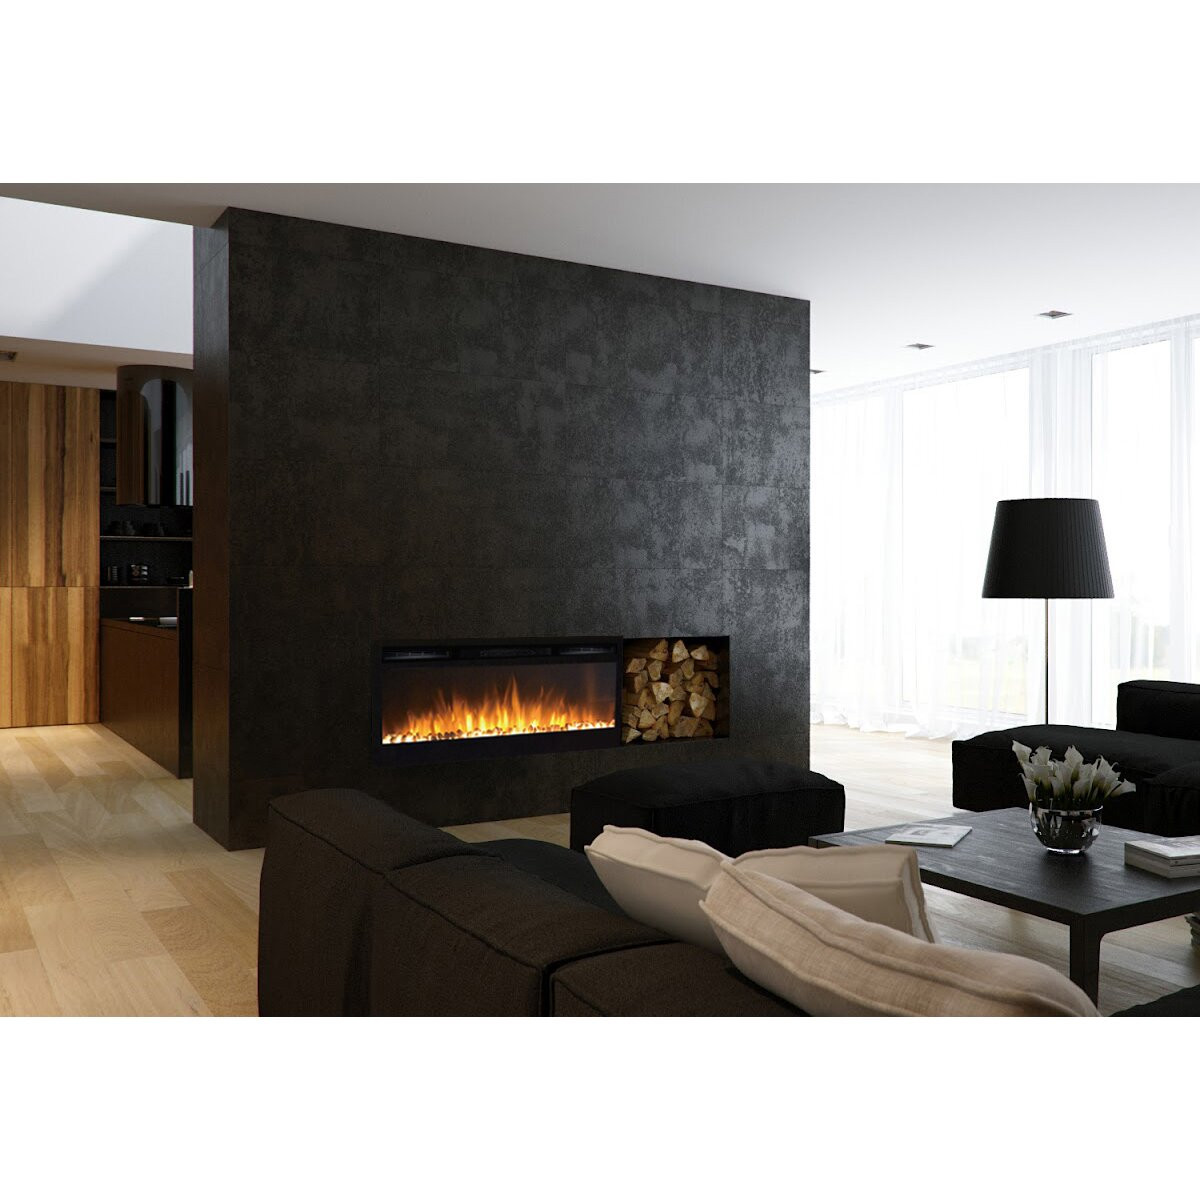 Hanging Electric Fireplace
 Moda Flame Cynergy Pebble Stone Built In Wall Mount